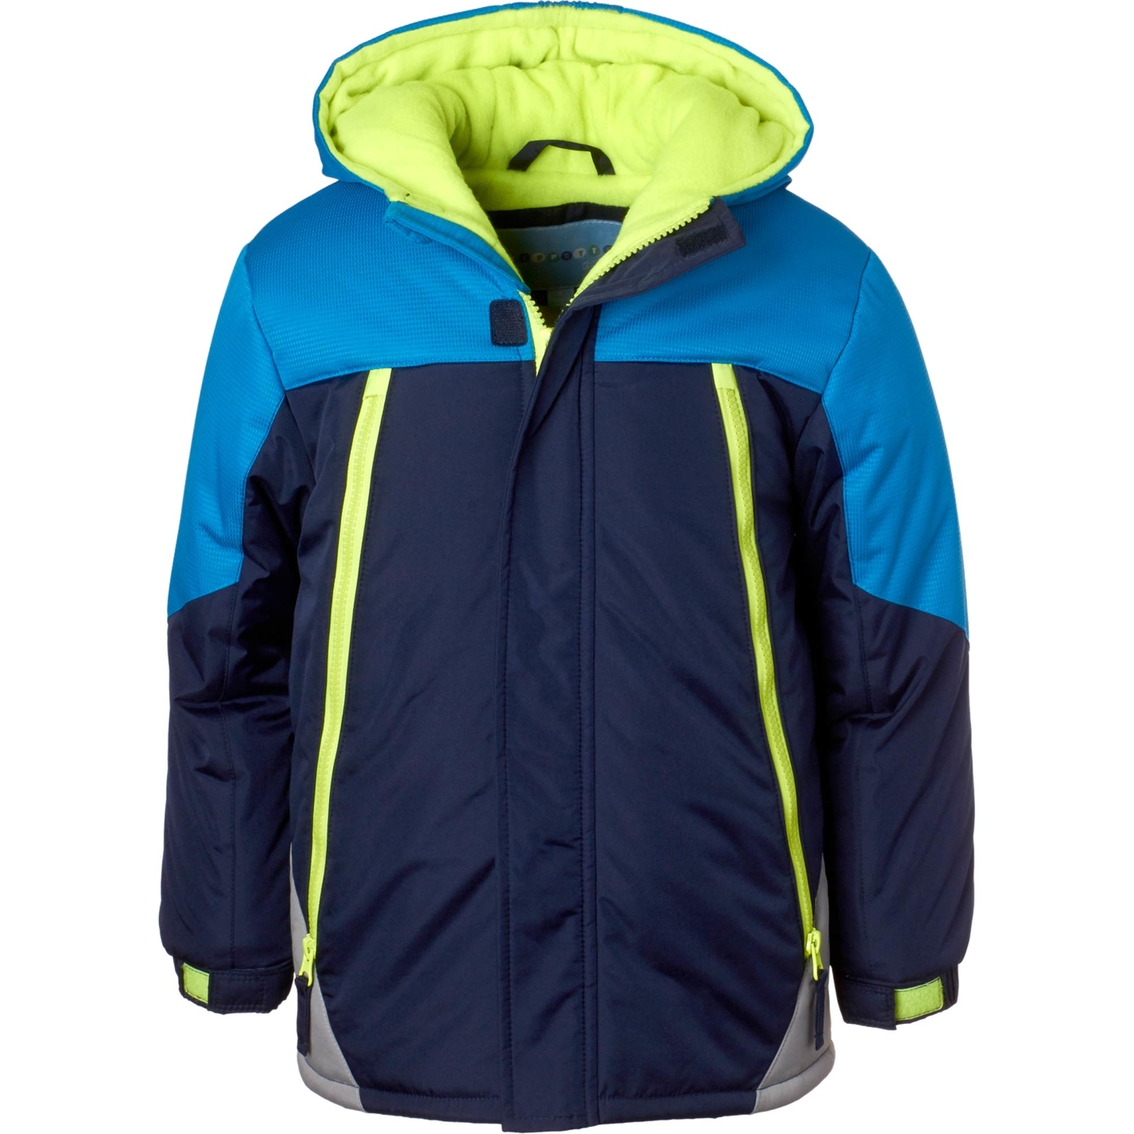 Wippette Colorblock Ski Jacket | Toddler Boys 2t-5t | Clothing ...